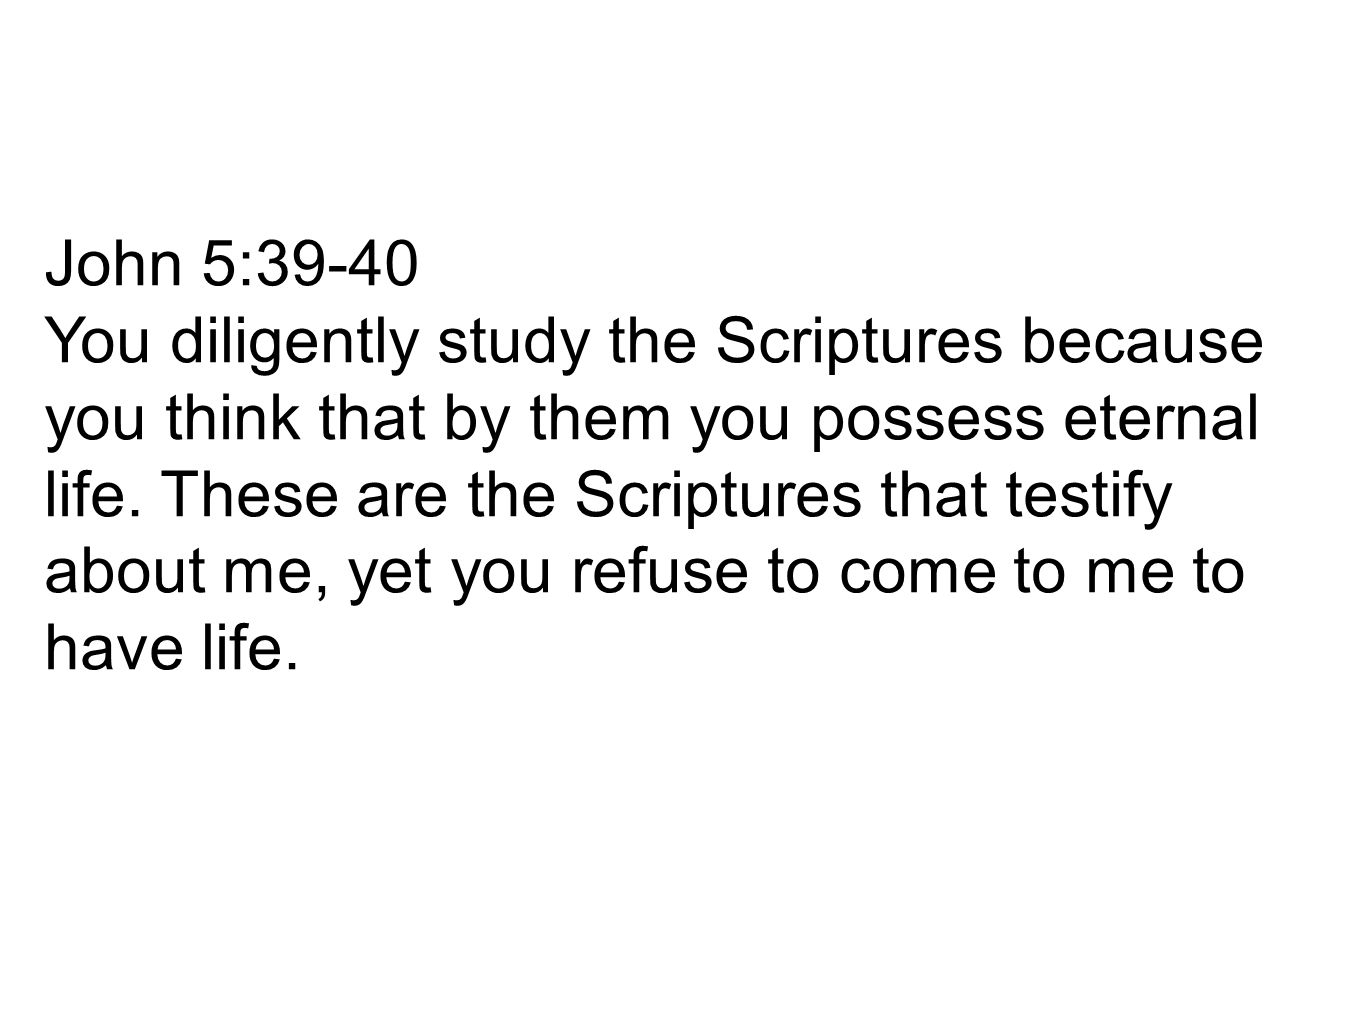 John 5:39-40 You diligently study the Scriptures because you think that by them you possess eternal life.